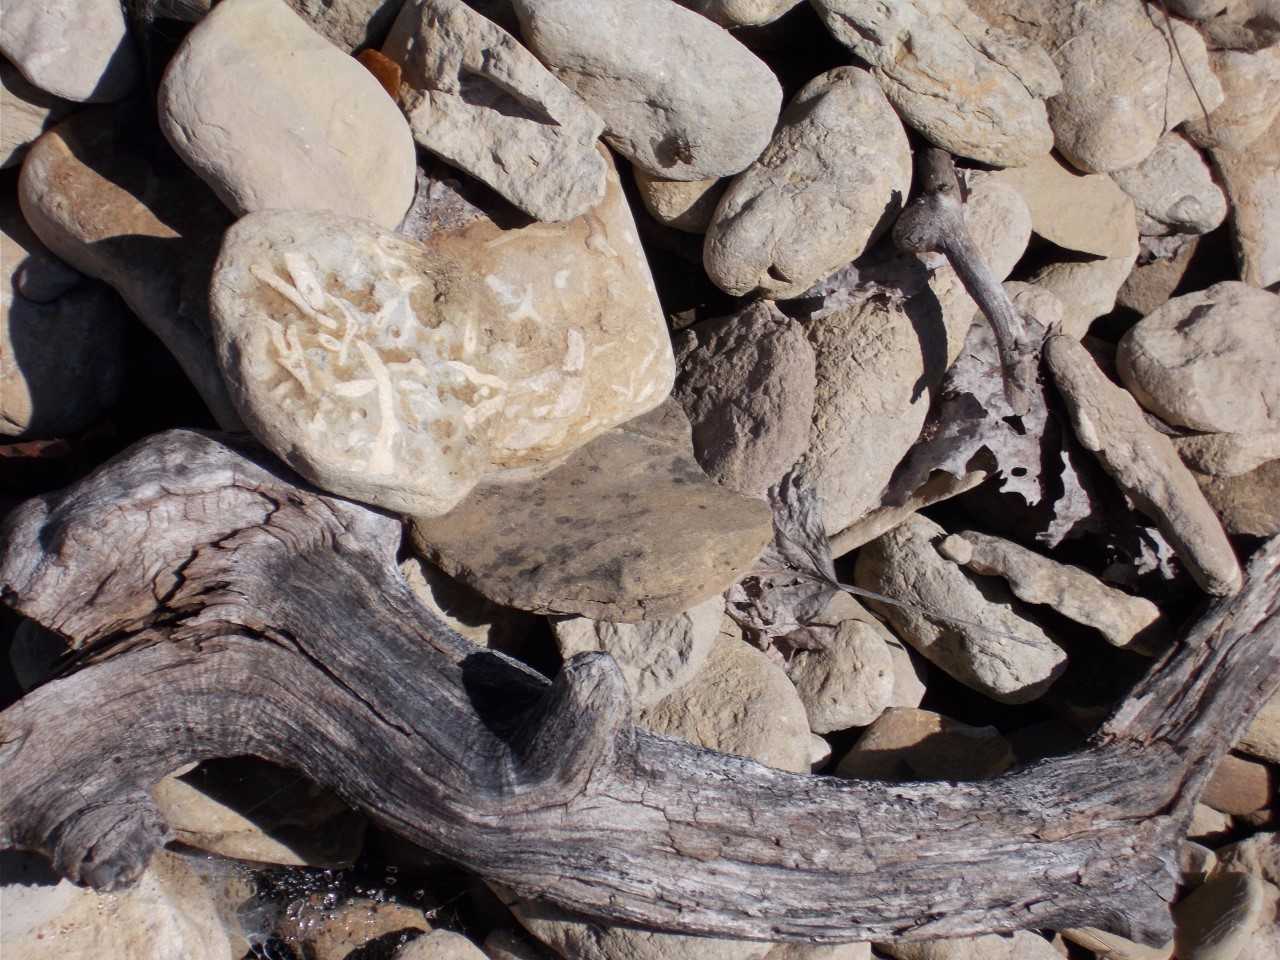 Image of rocks with fossils beside driftwood on beach